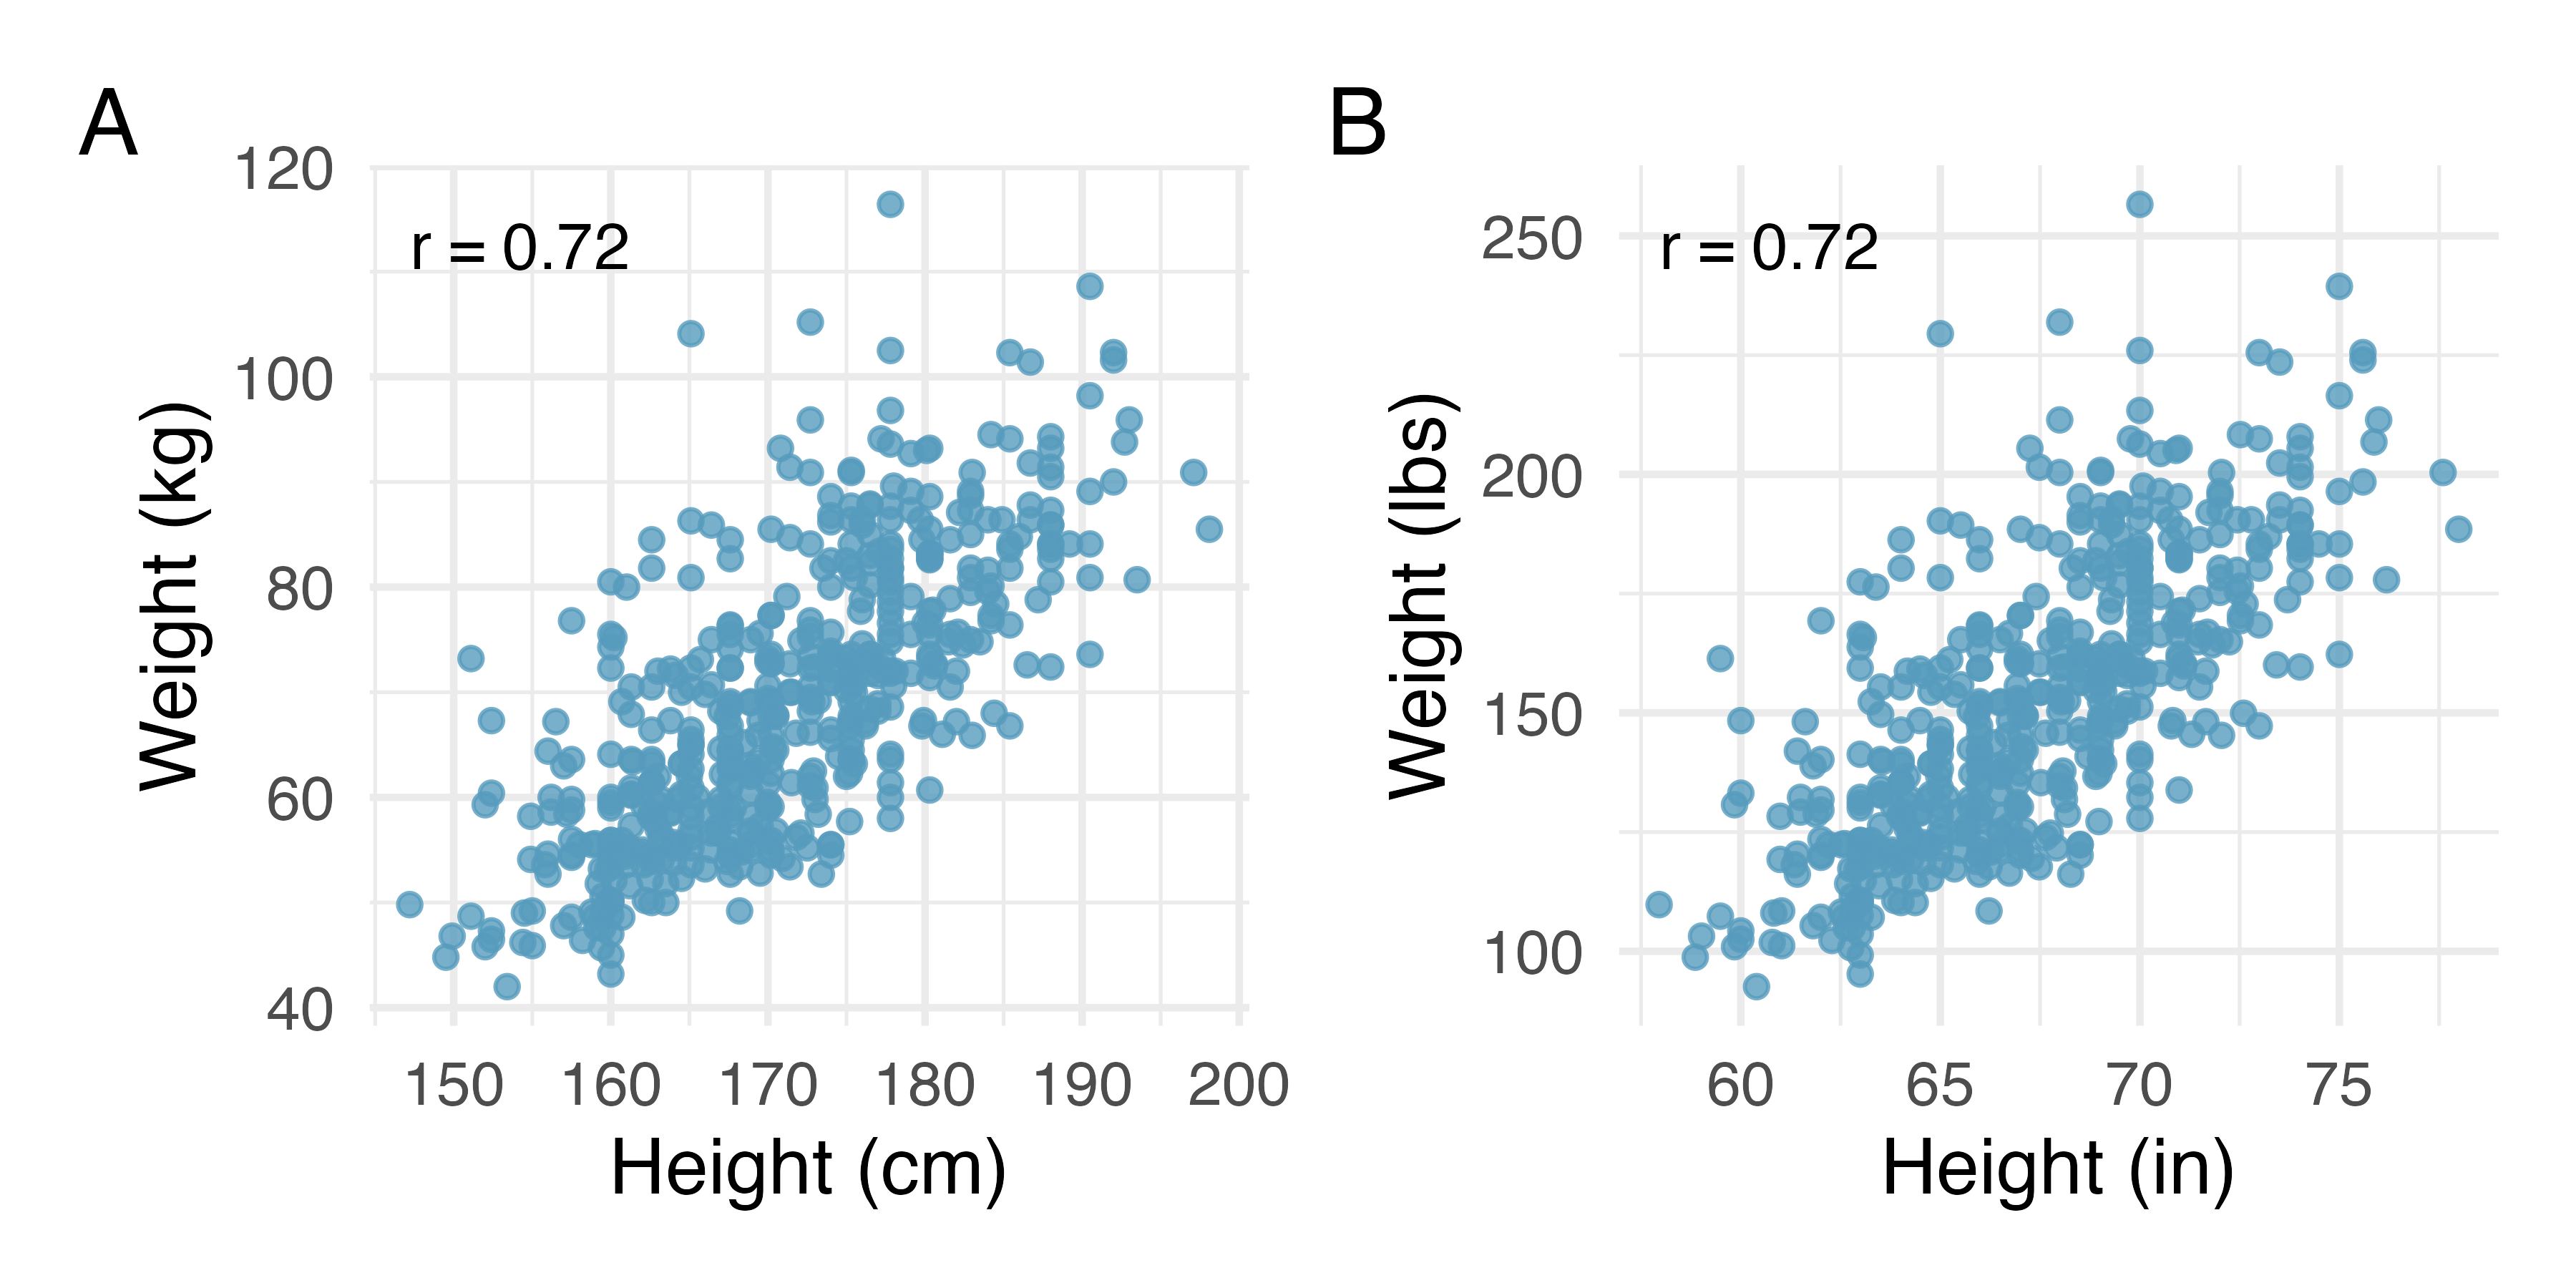 Two scatterplots, both displaying the relationship between weights and heights of 507 physically healthy adults. In the first plot height is measured in cm and weight is measured in kg. In the second plot height is measured in inches and weight is measured in pounds.  The images look identical, except for the axes tick marks.